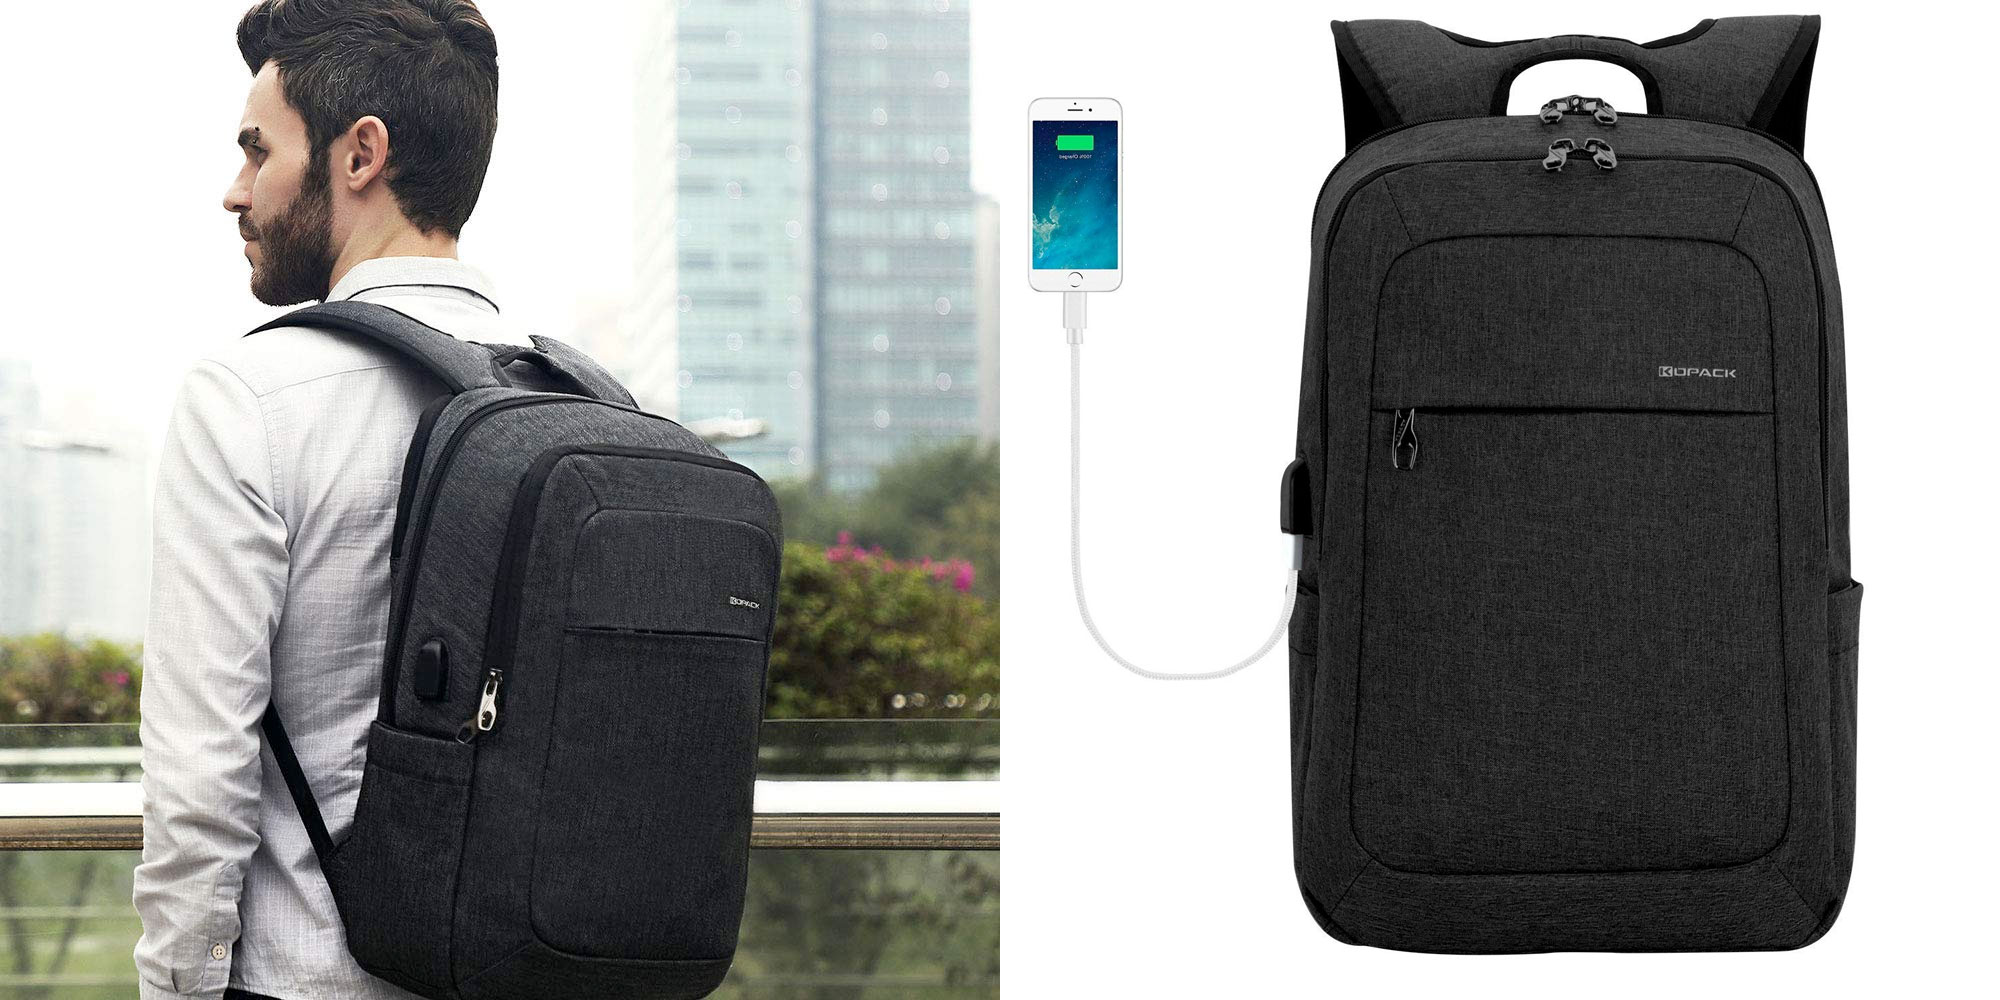 Tote your MacBook in style with this slim laptop bag from $21 shipped ...